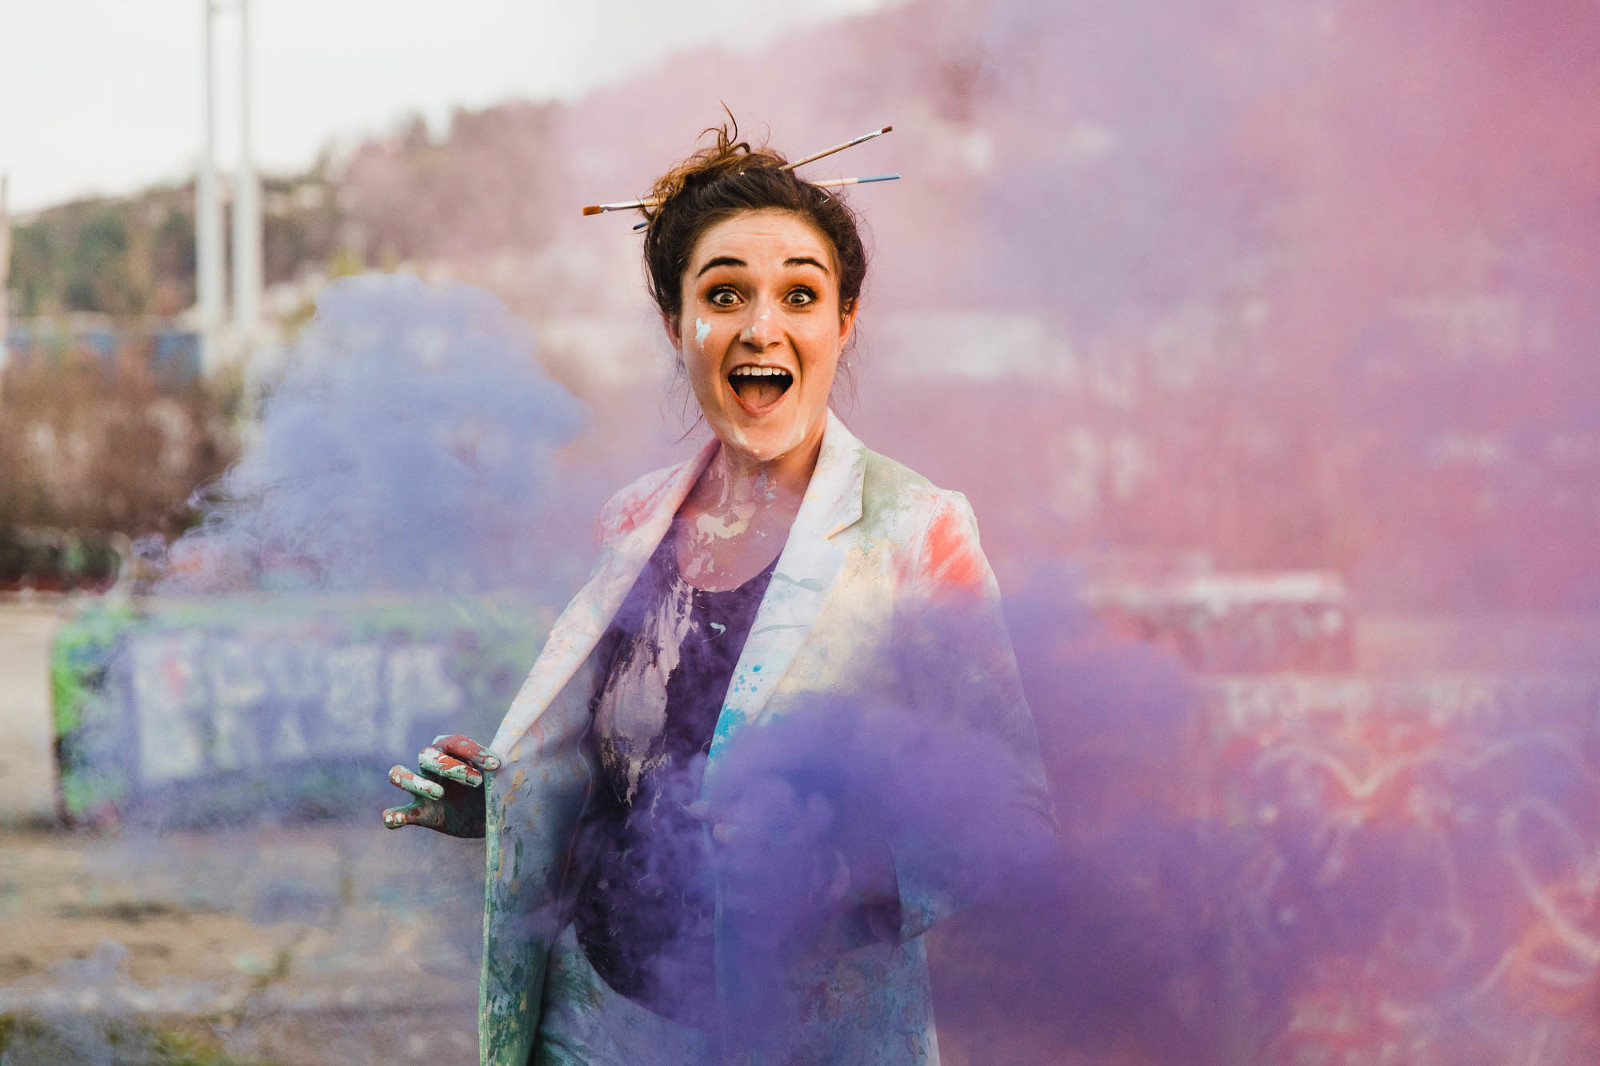 artist is covered and paint surrounded by colorful smoke bombs